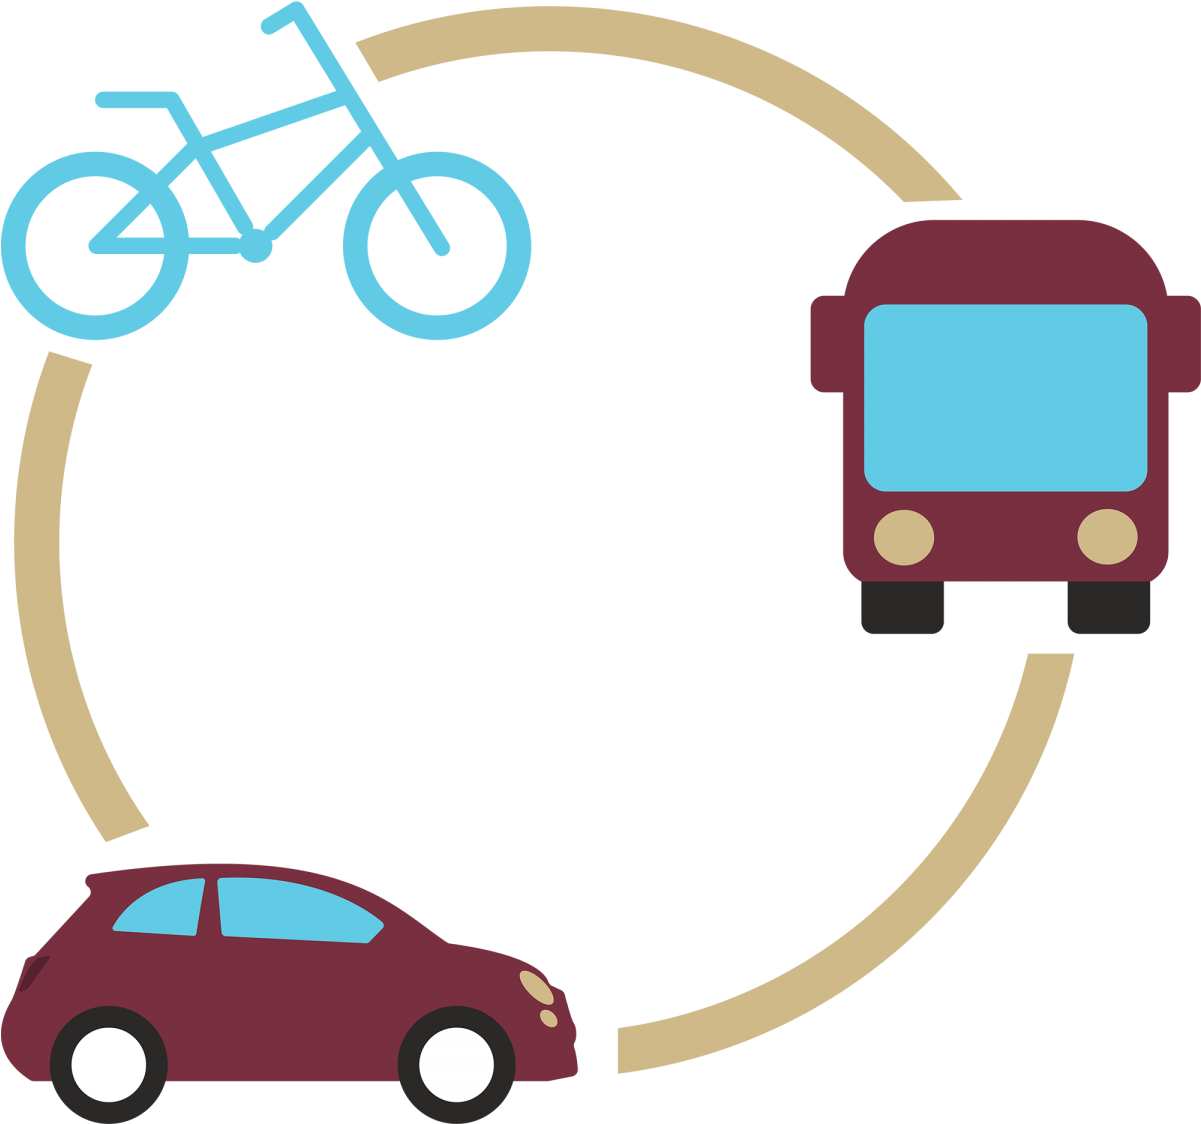 Transportation Modes Cycle Bus Car Graphic PNG